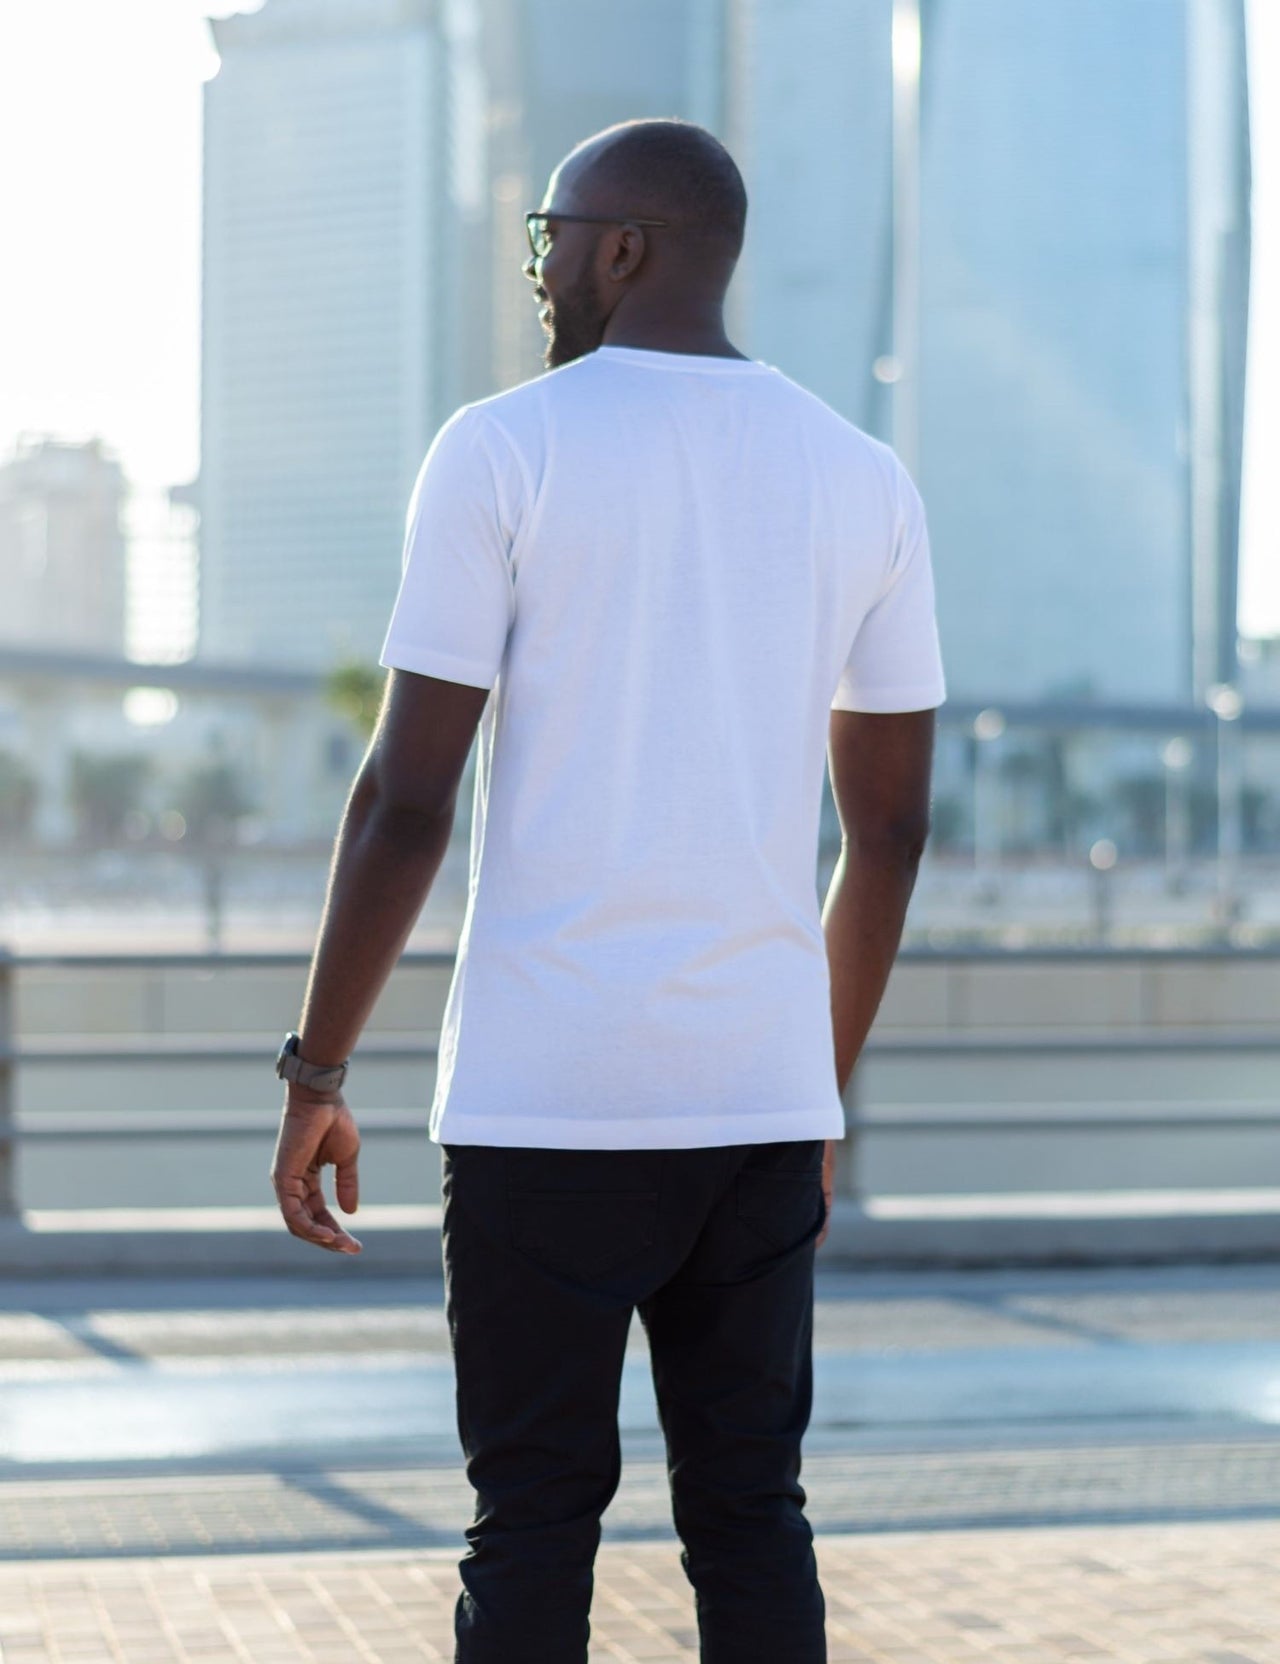 A shot from behind of a tall skinny guy in the street and wearing a white tall slim fit t-shirt.